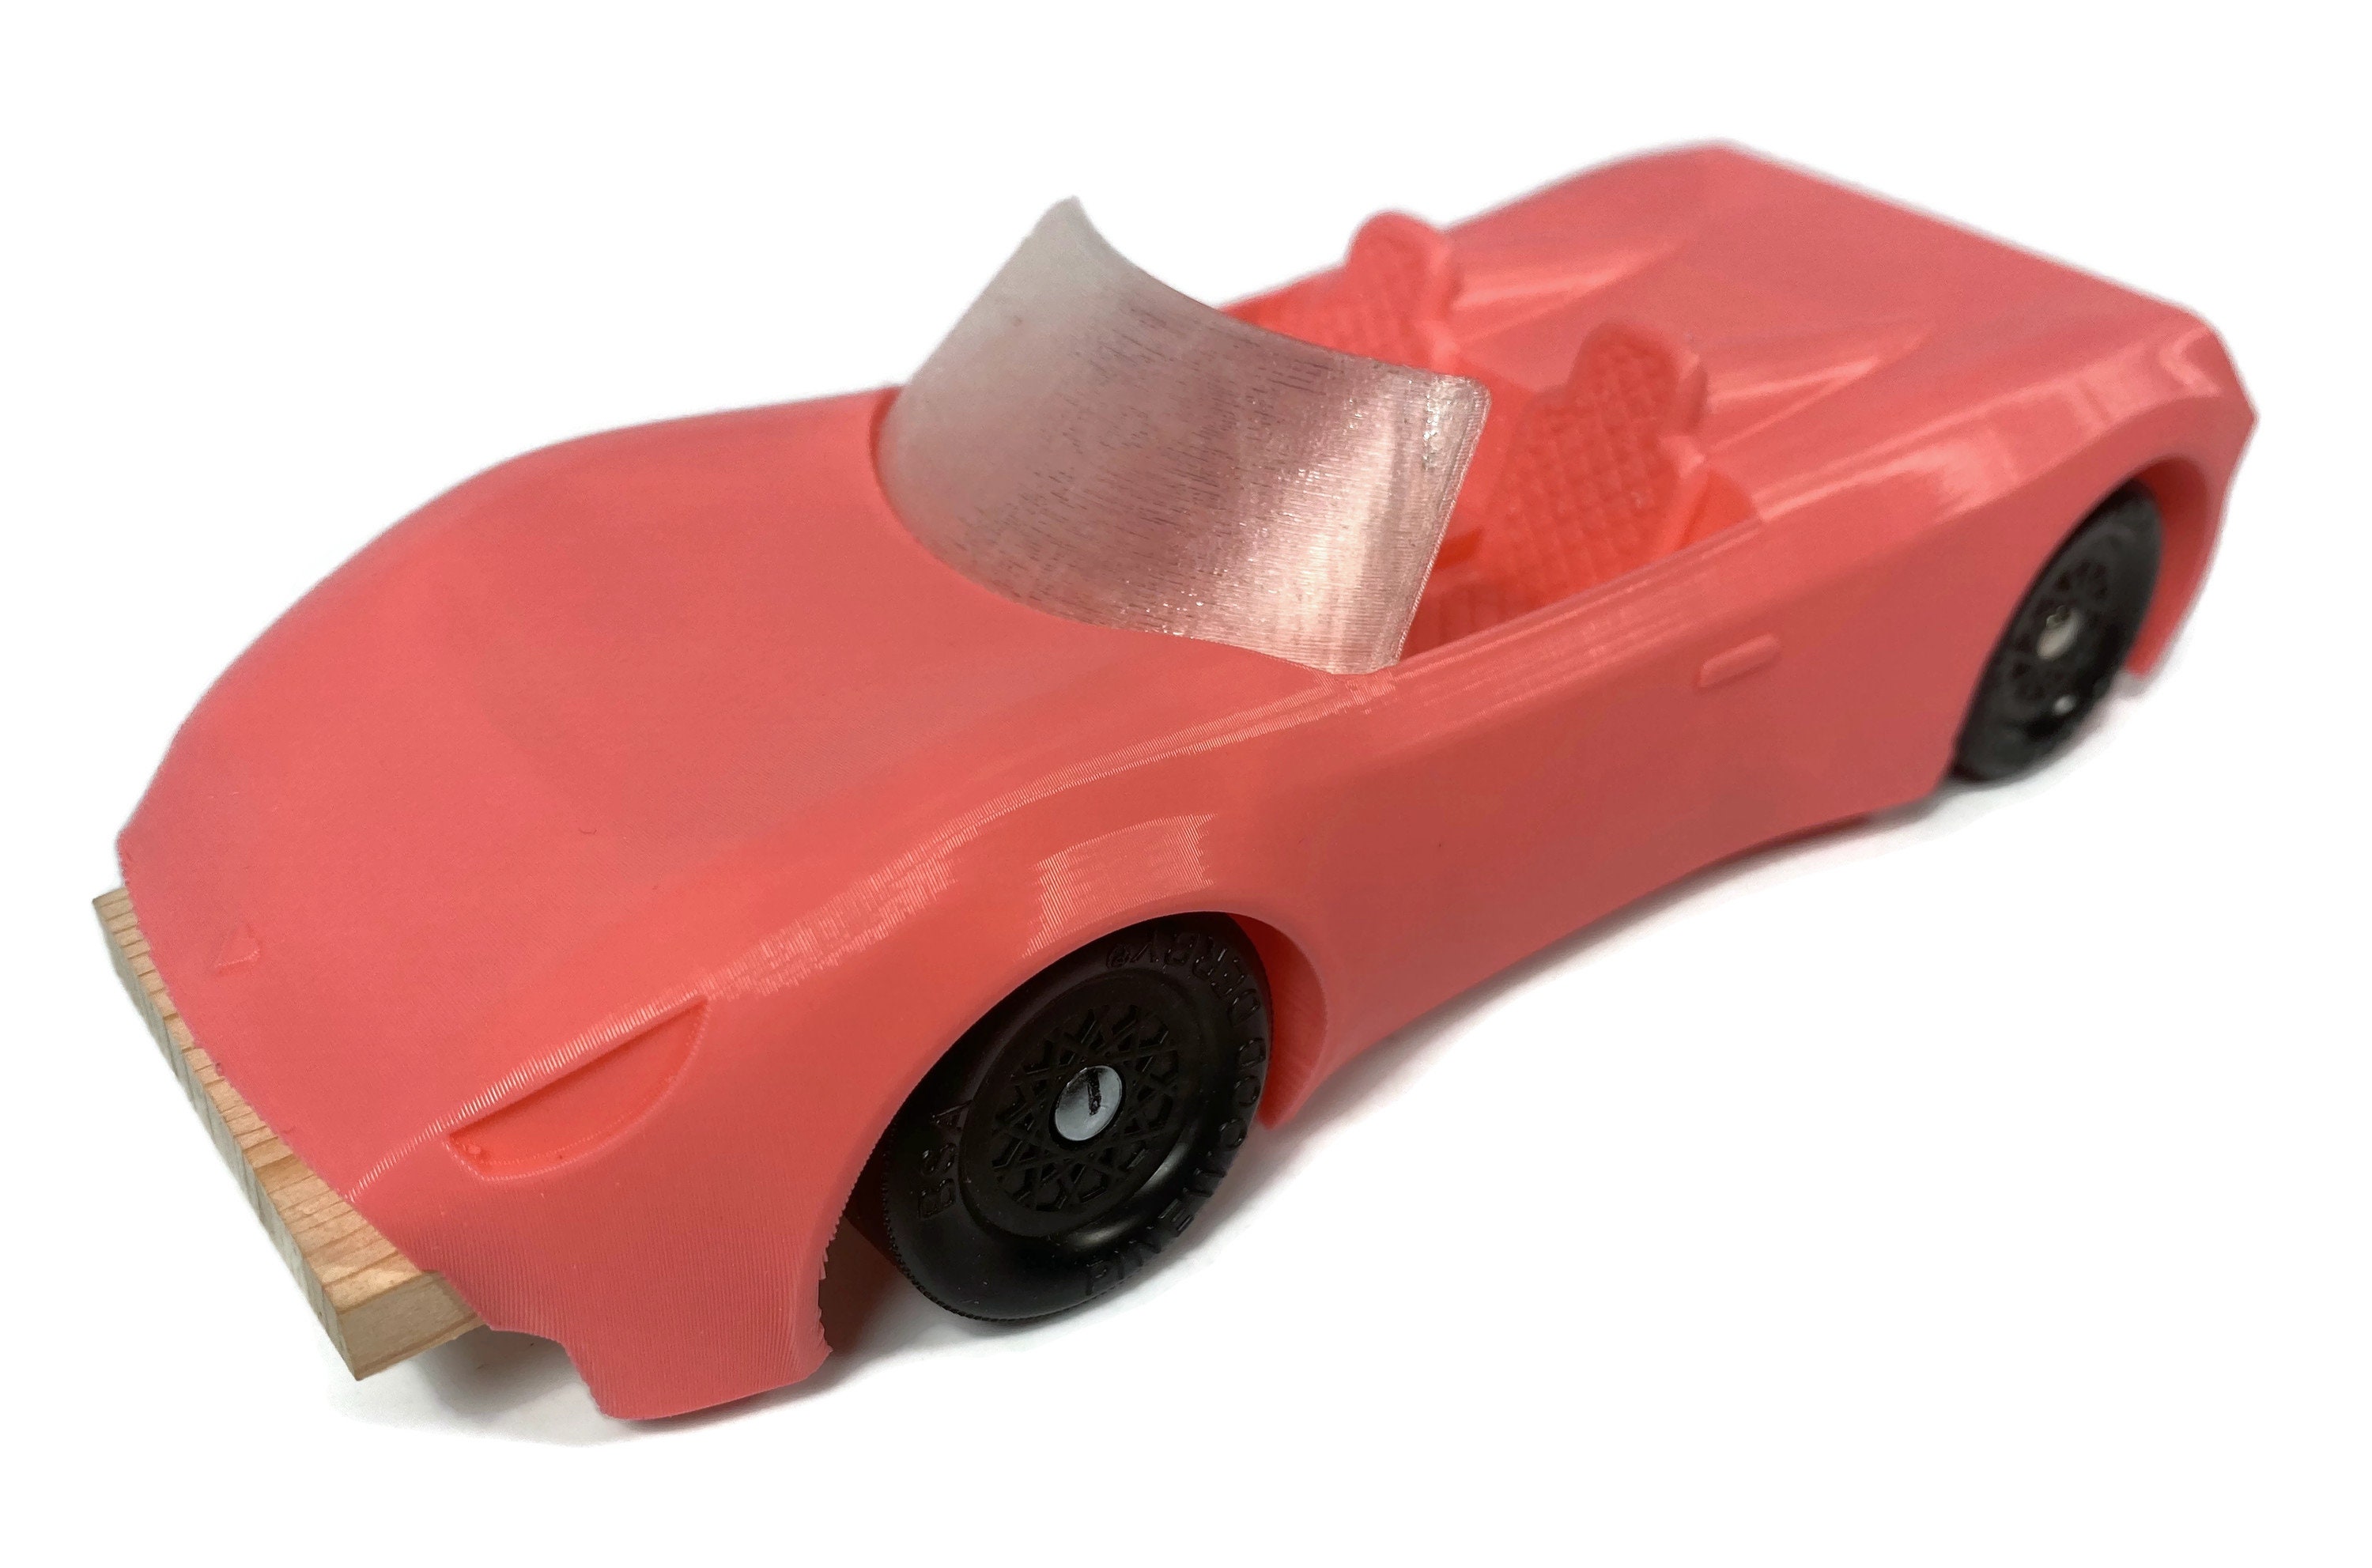 Pinewood Derby car kits: From tree to track (full version)  Ever wondered  how the BSA makes more than 1 million Pinewood Derby car kits each year?  Here's a look at the